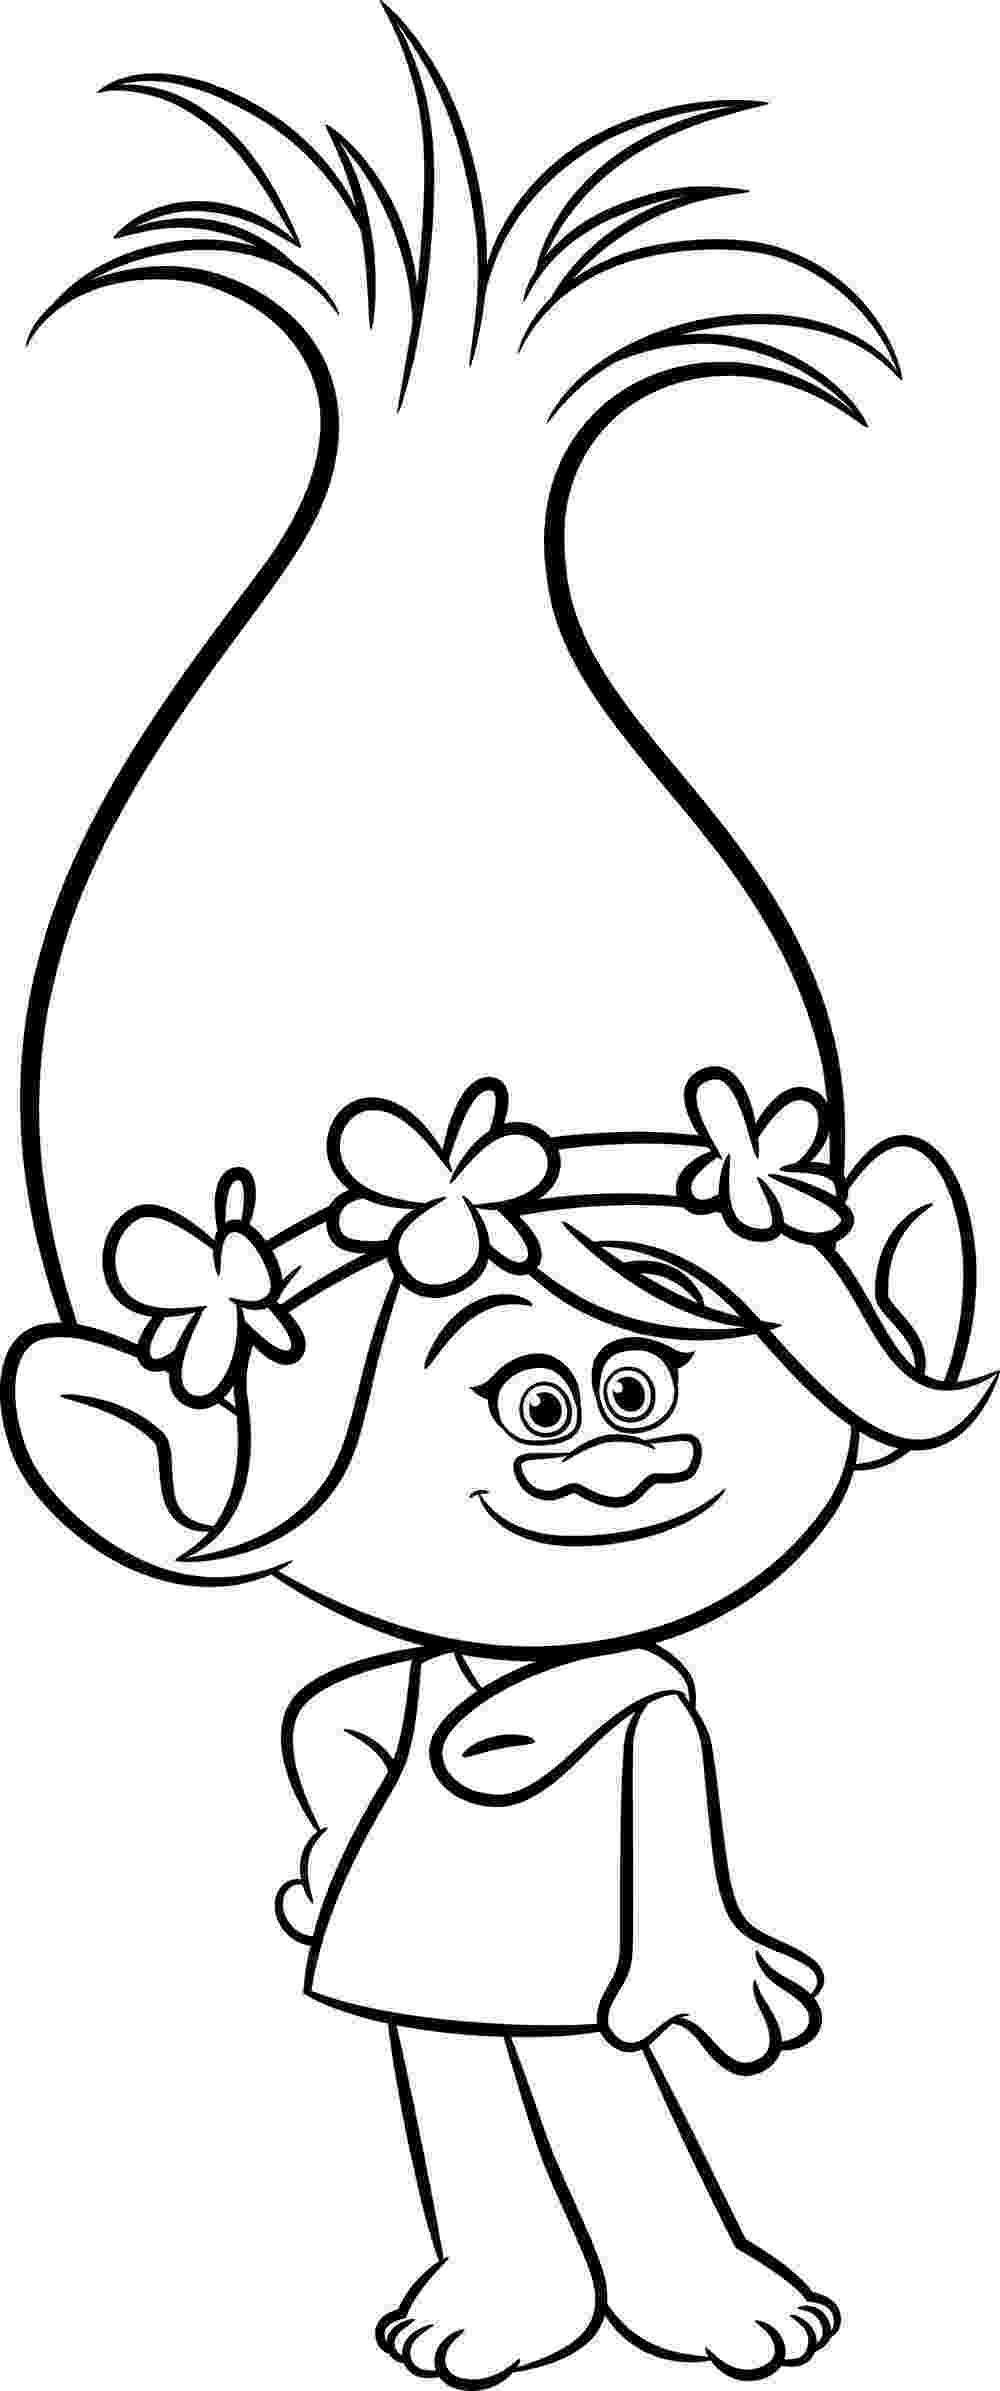 printable coloring pages trolls trolls coloring pages trolls pages coloring printable 